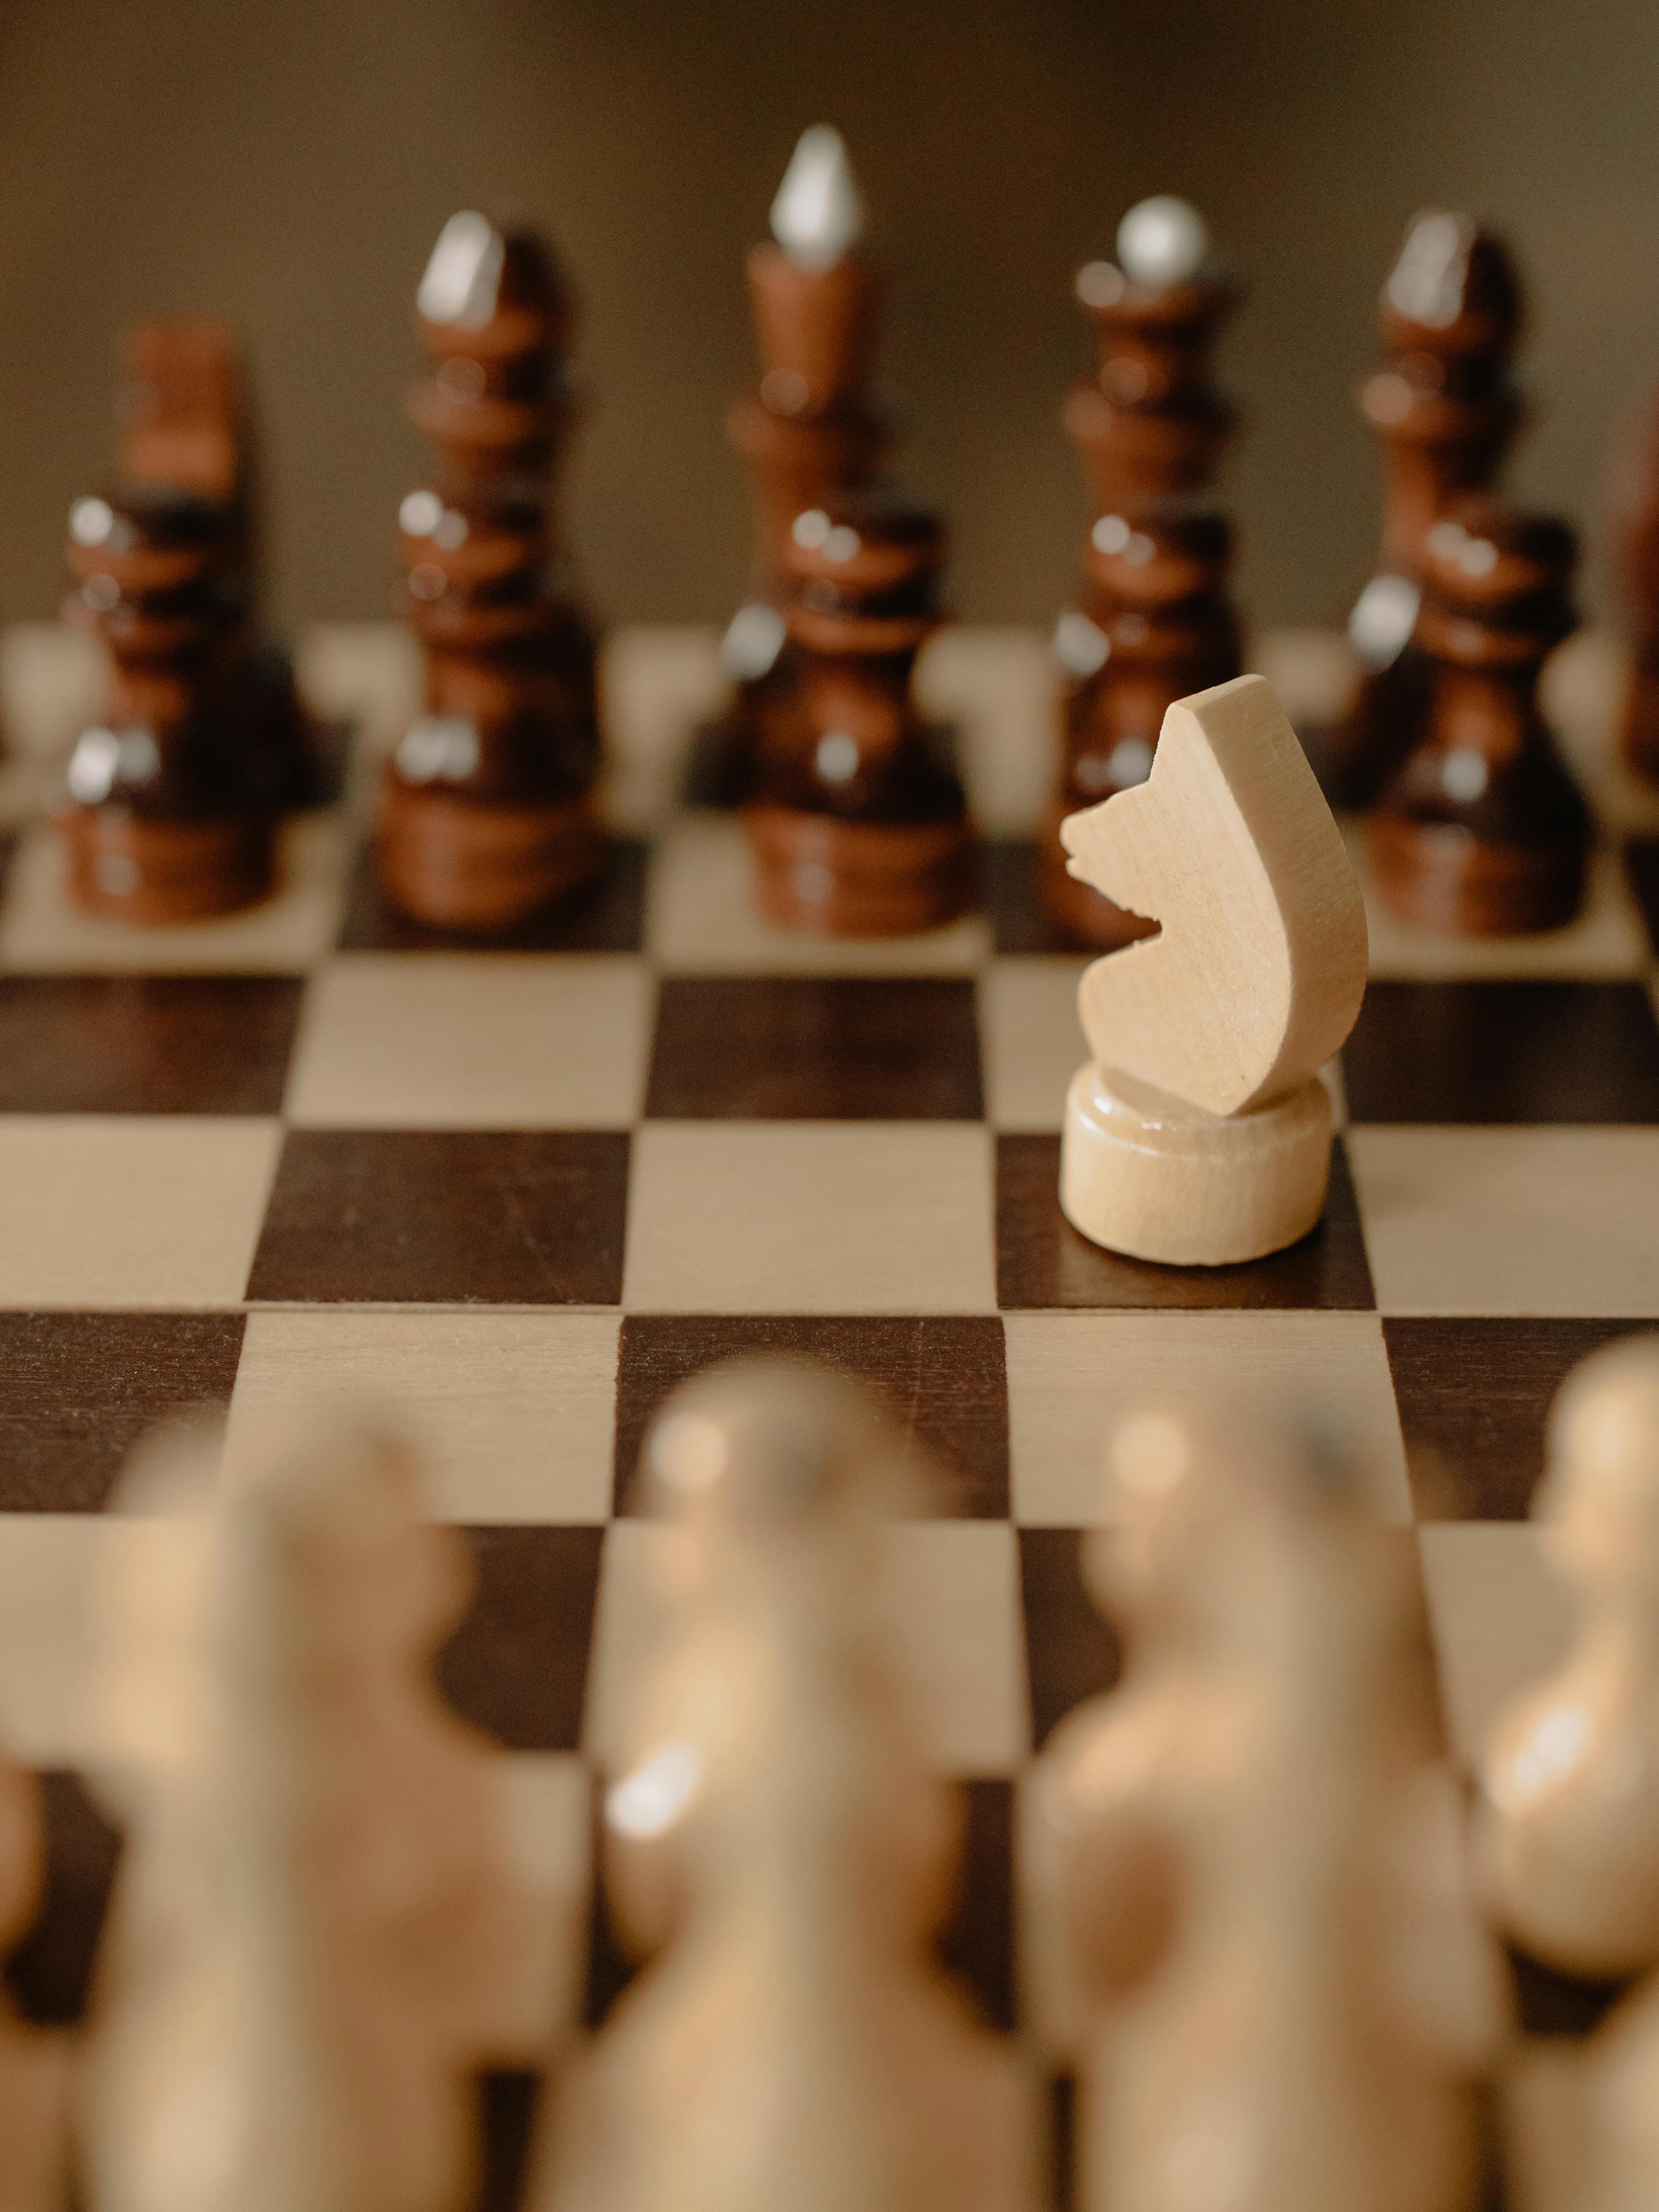 Checkmate Photos, Download The BEST Free Checkmate Stock Photos & HD Images